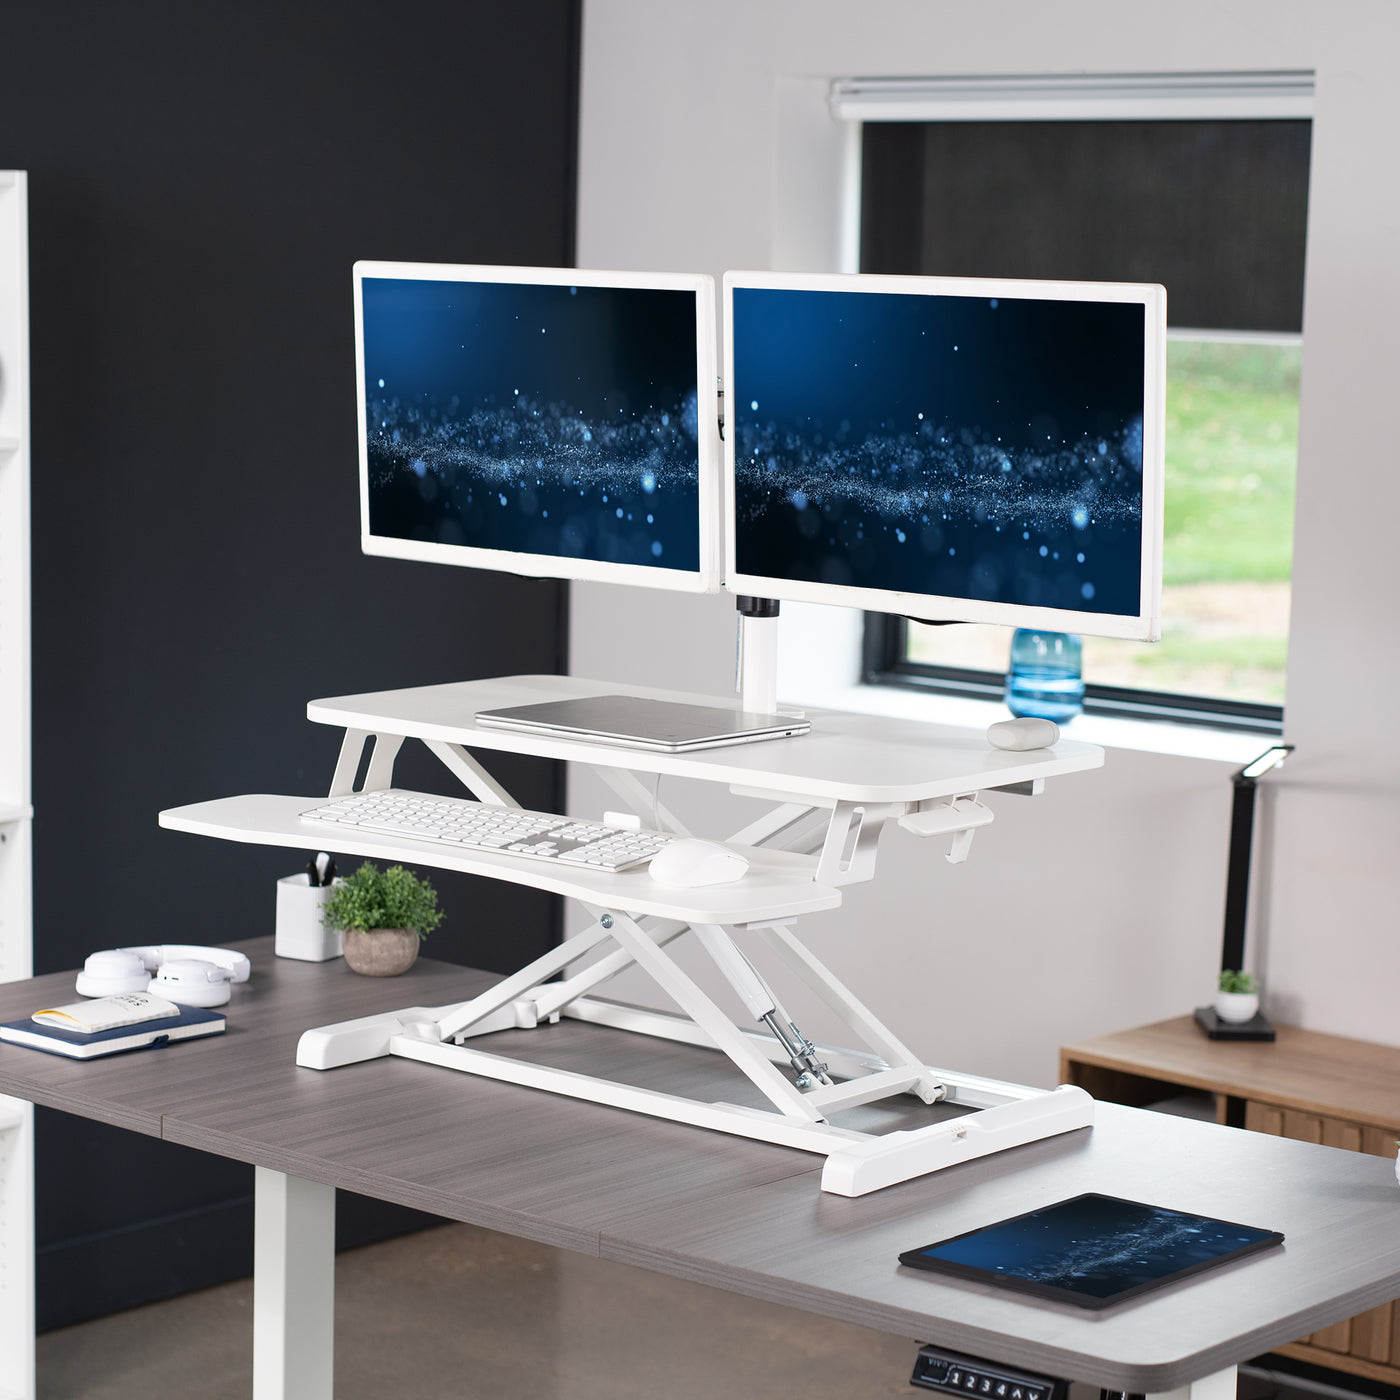 Sturdy height adjustable desk converter with articulating dual monitor mount.